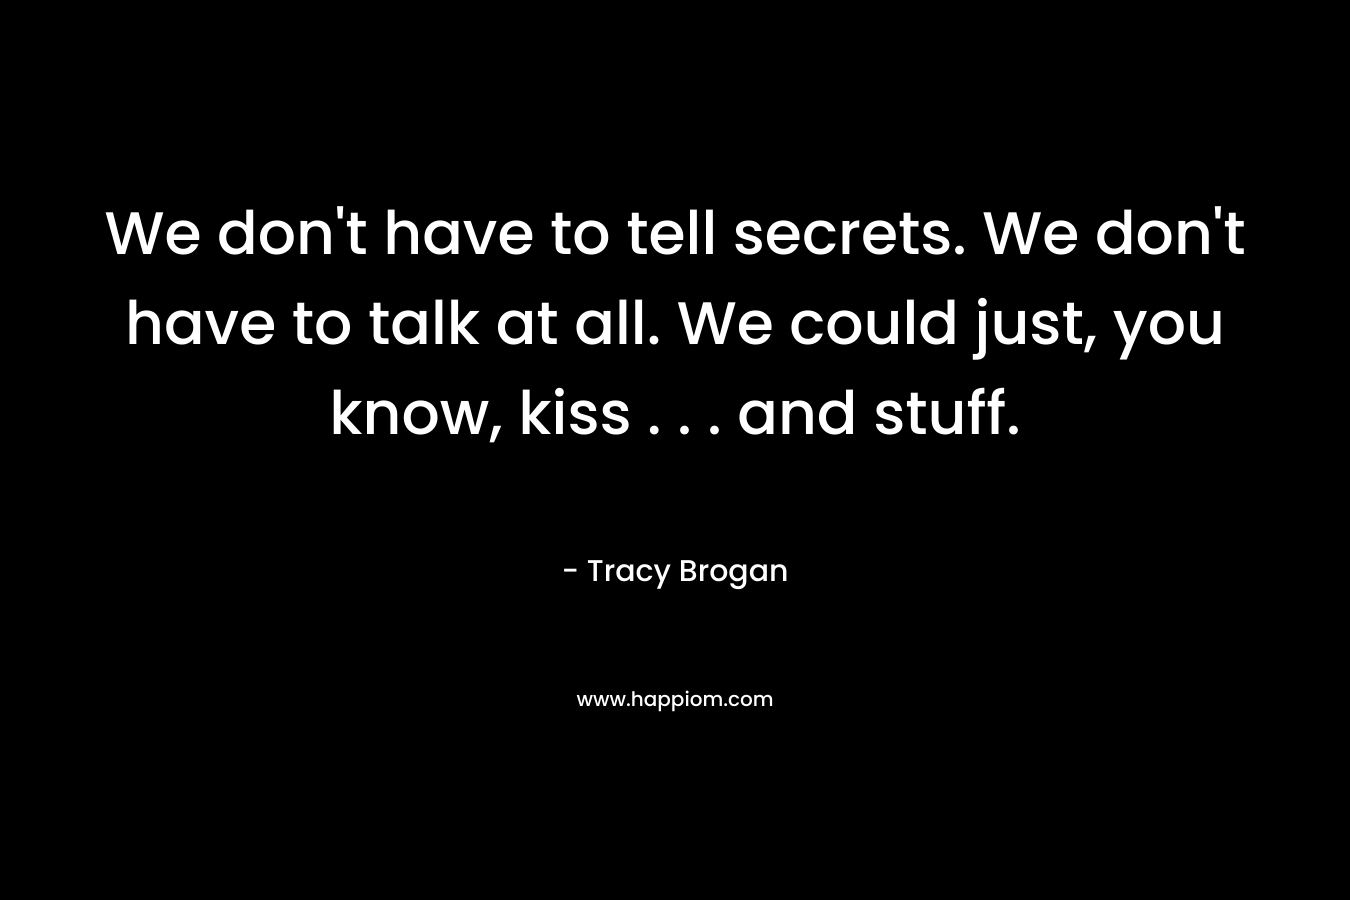 We don't have to tell secrets. We don't have to talk at all. We could just, you know, kiss . . . and stuff.